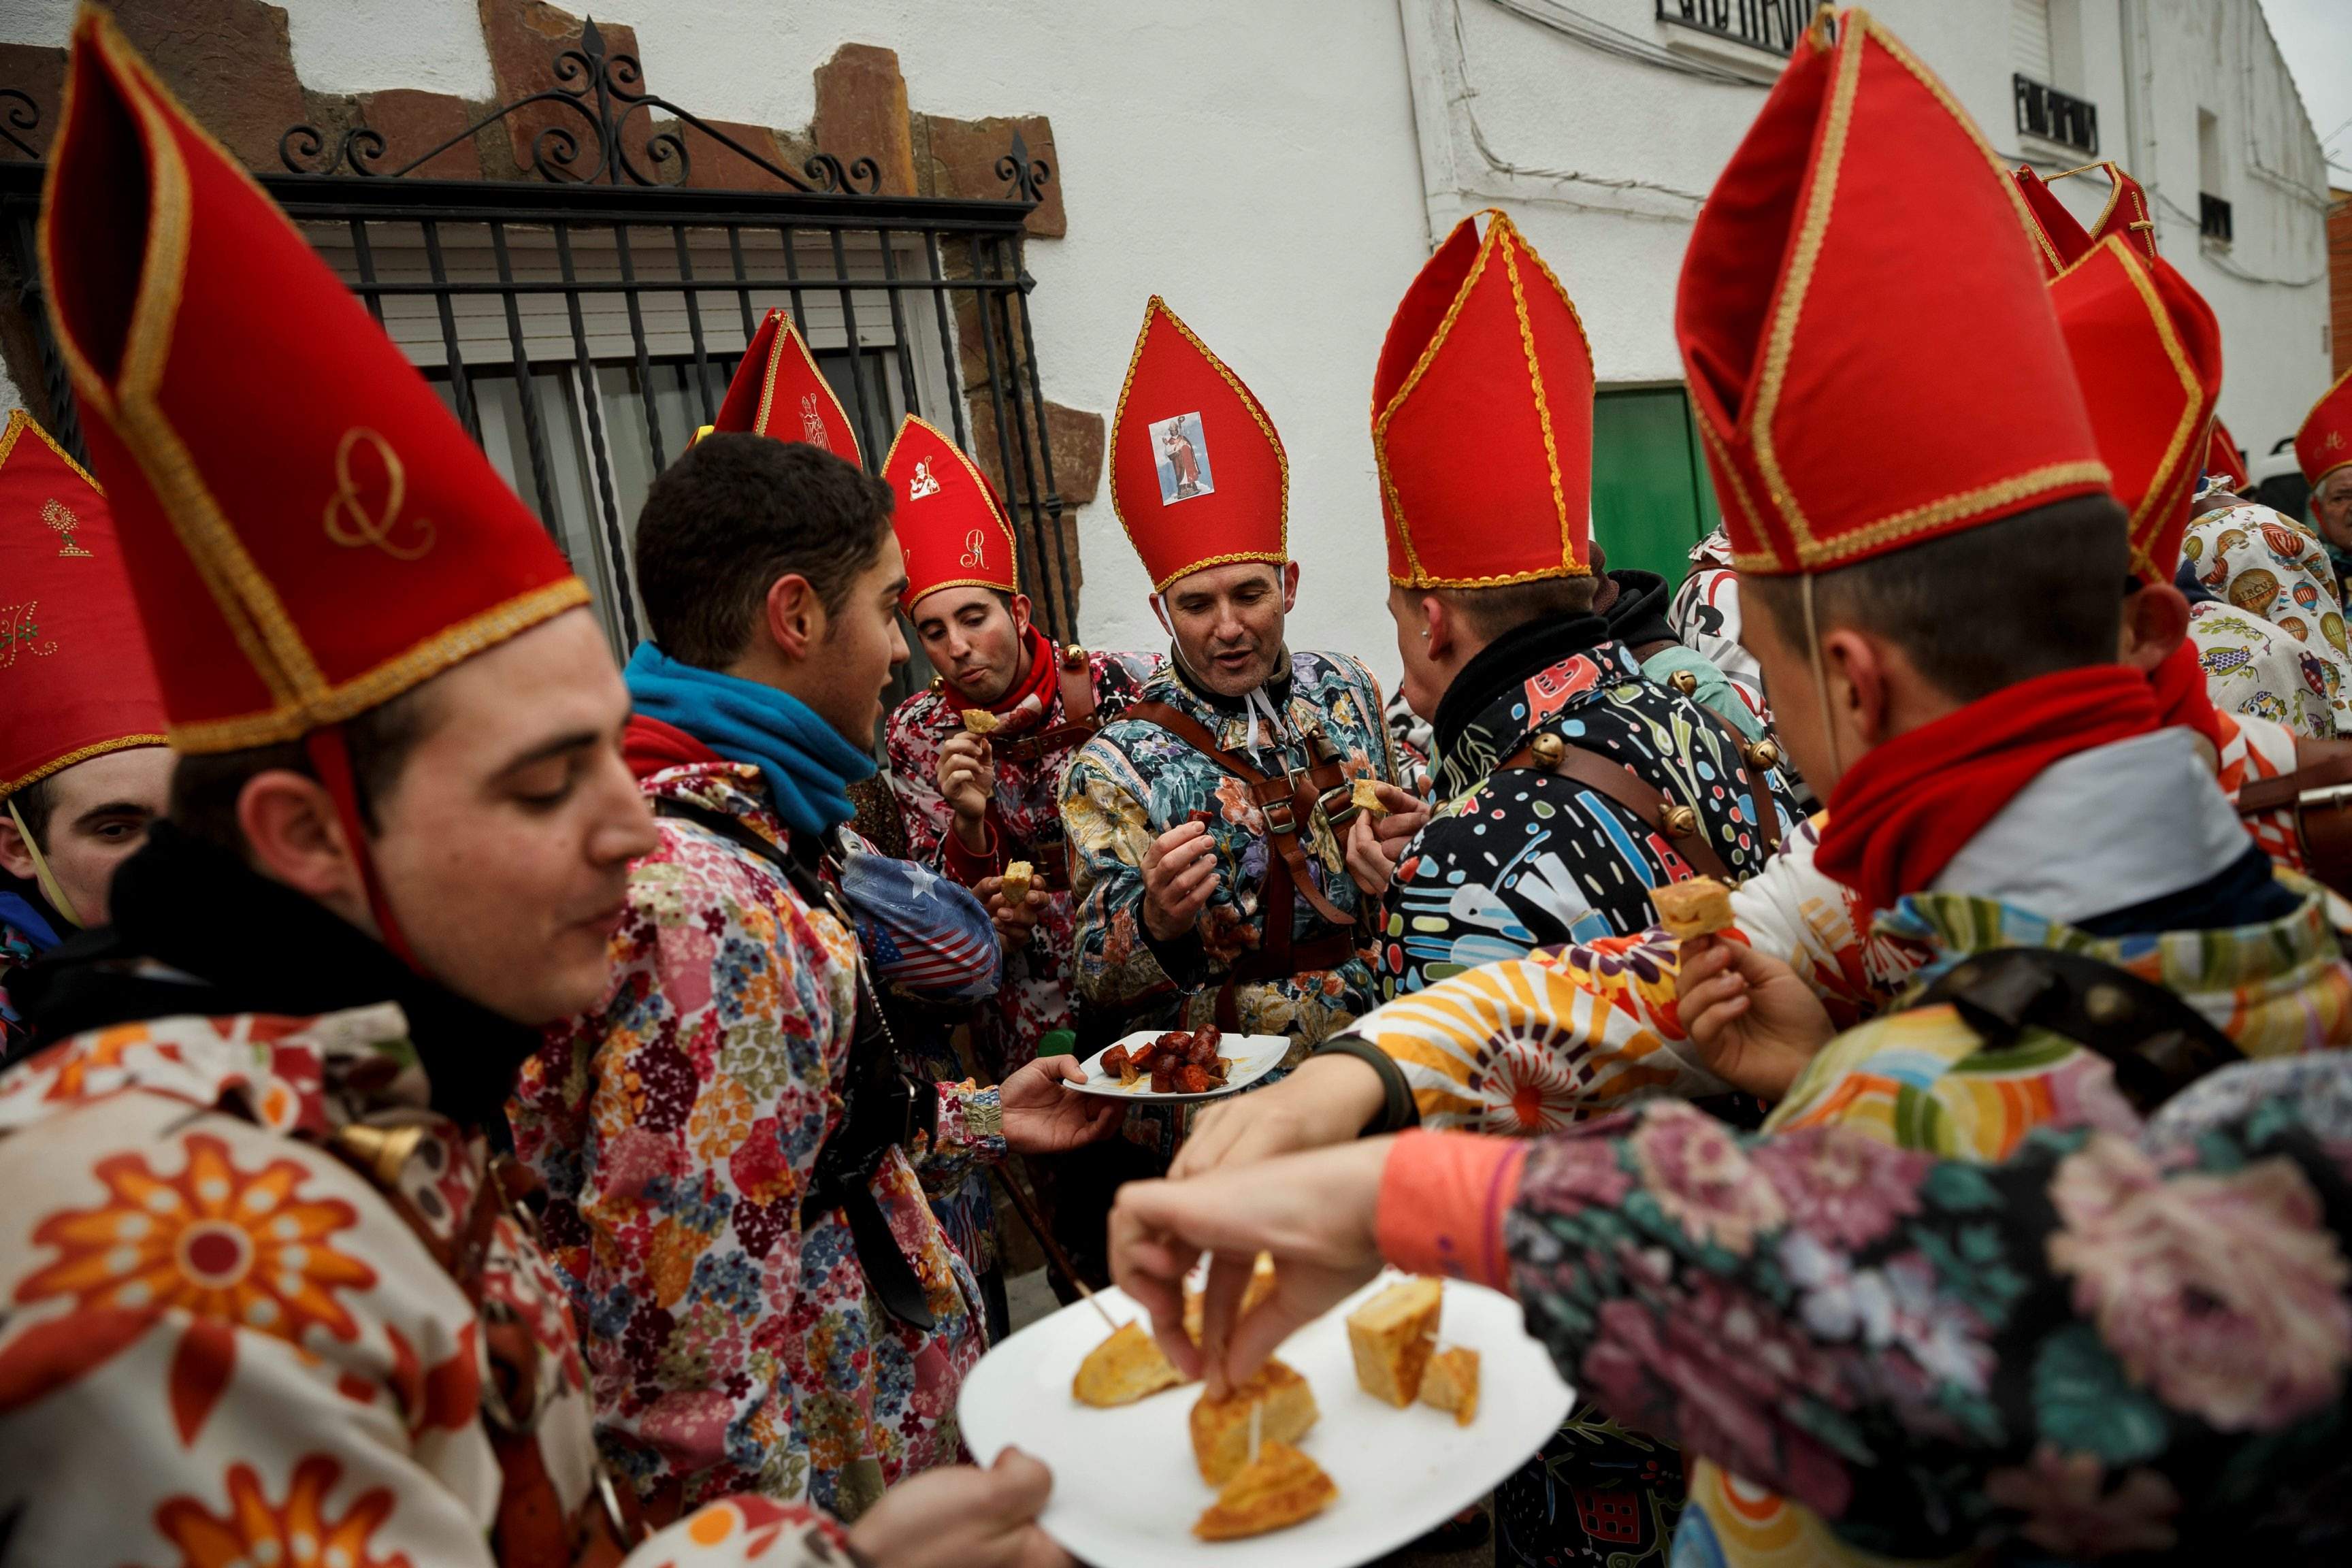 Spaniards clang bells in religious festival